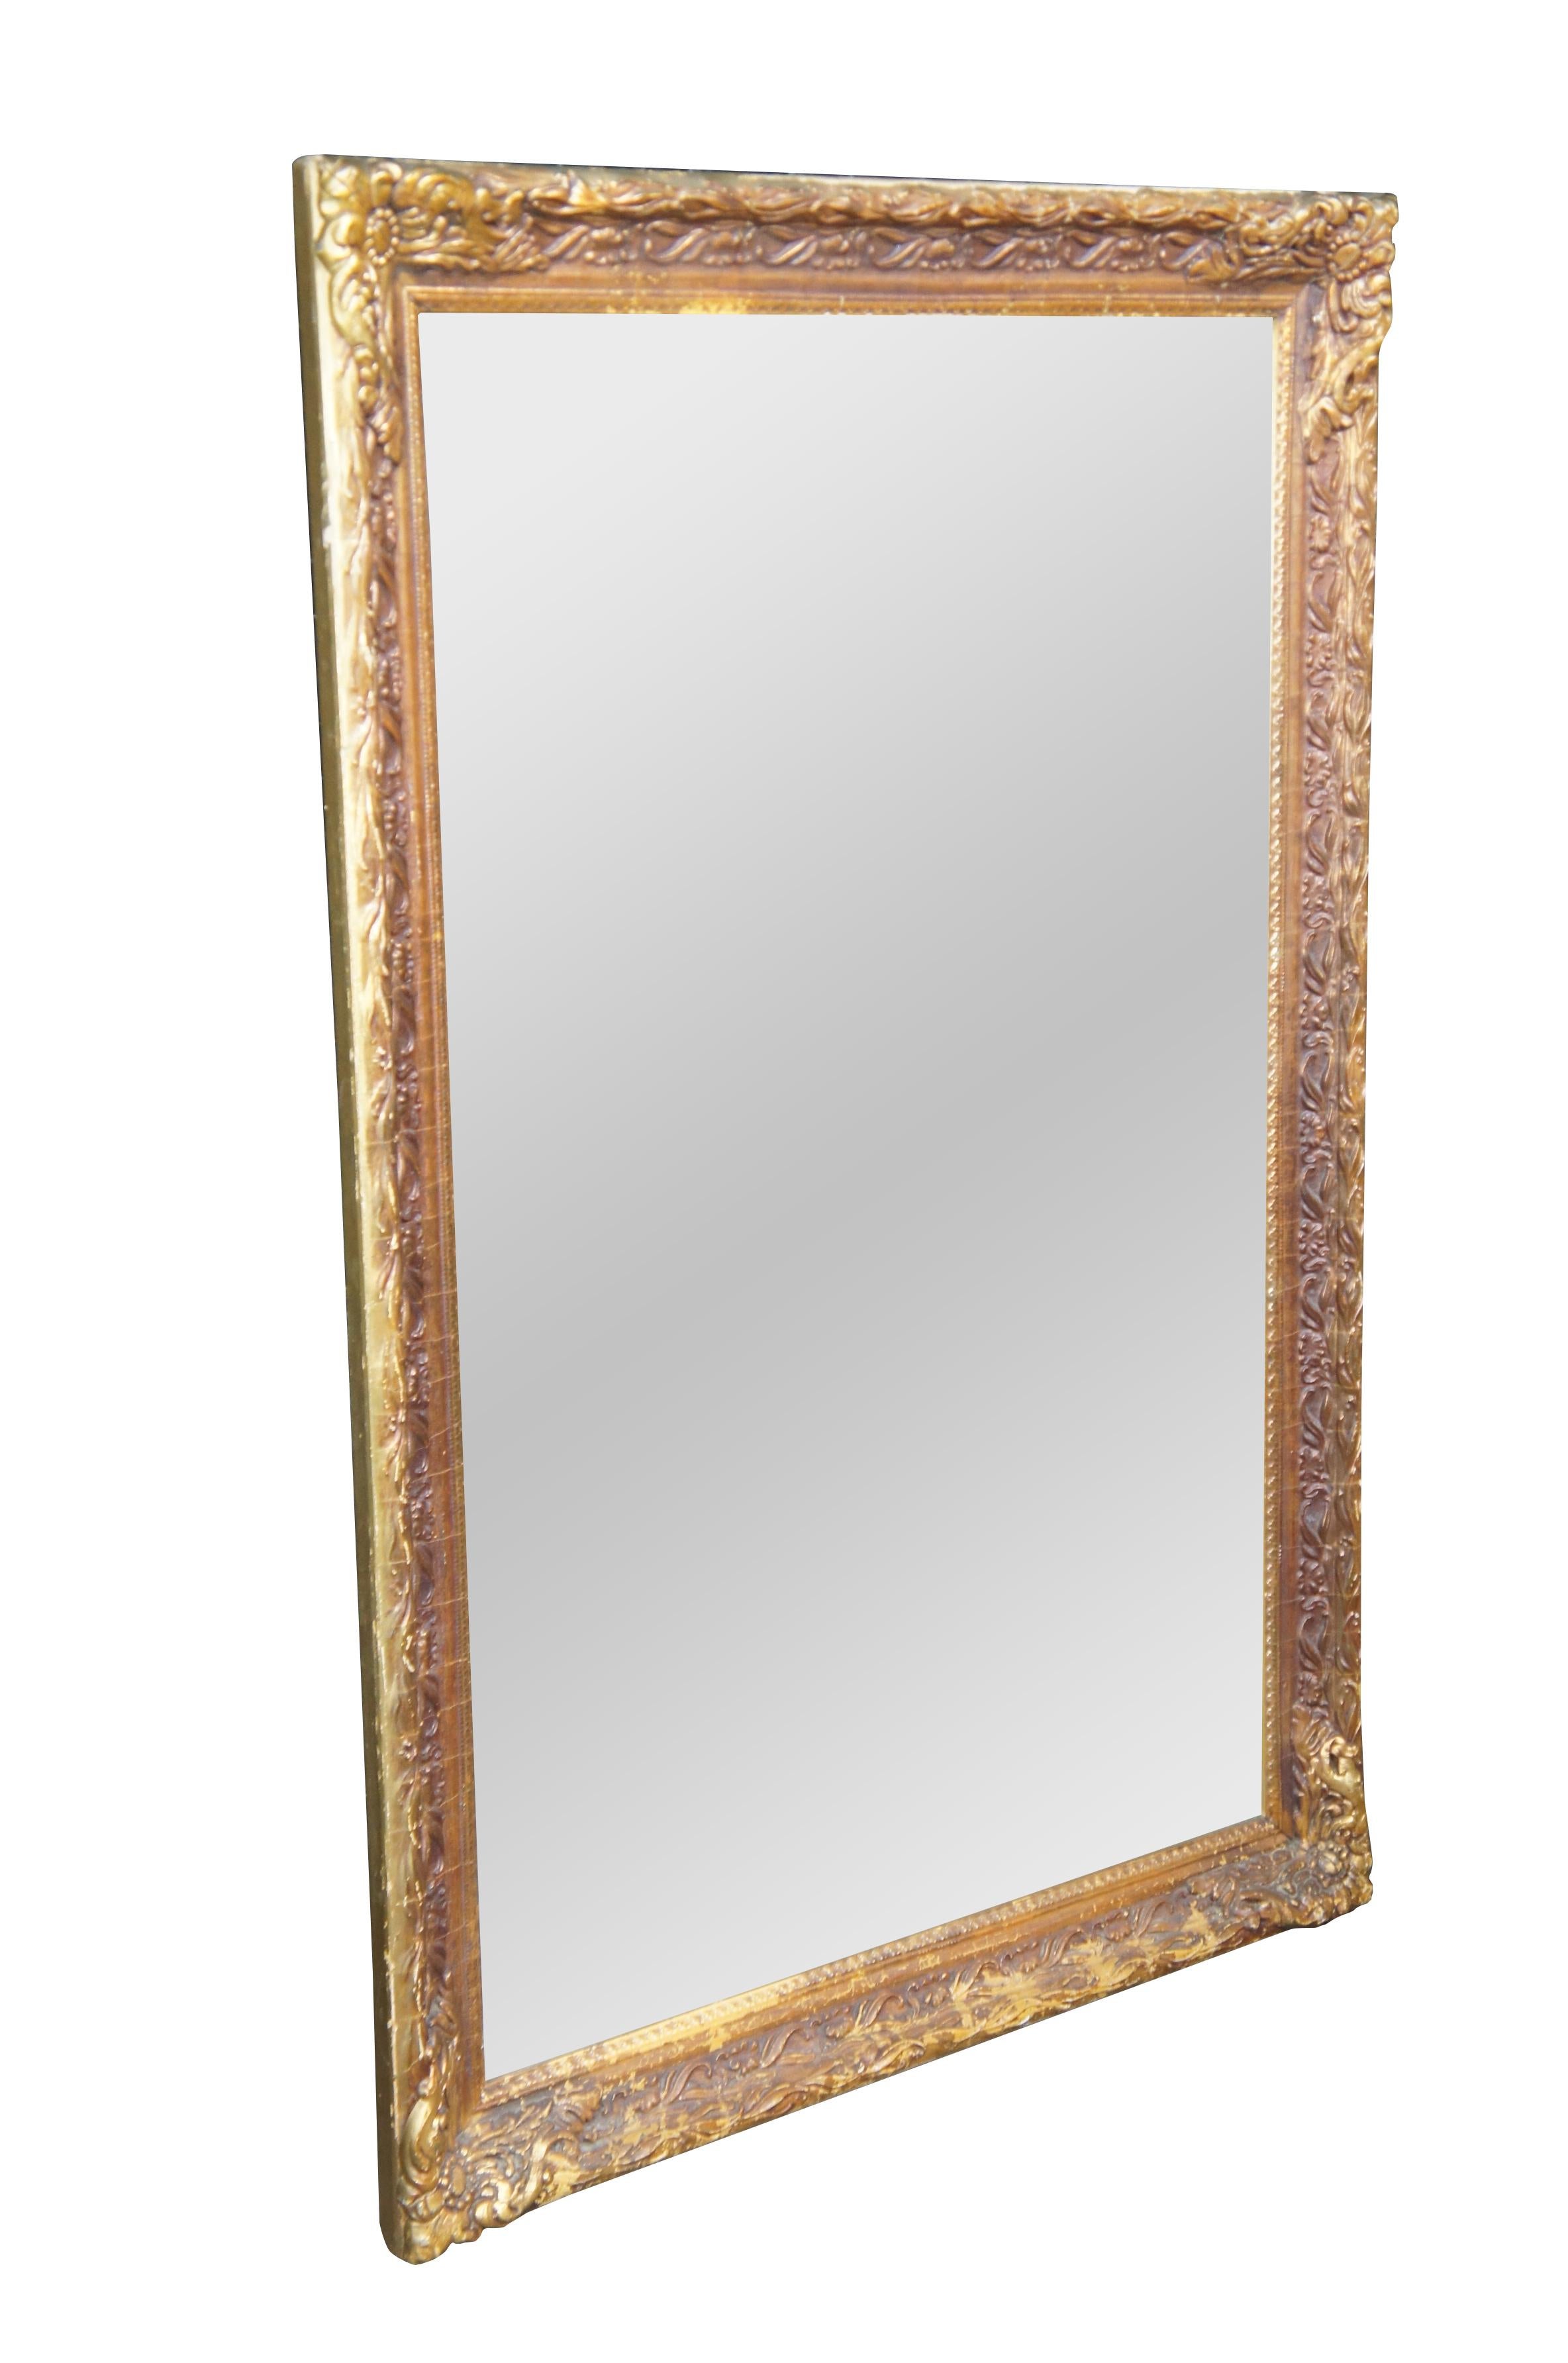 Vintage gold baroque mirror featuring rectangular form with low relief floral frame.

DIMENSIONS
26.5